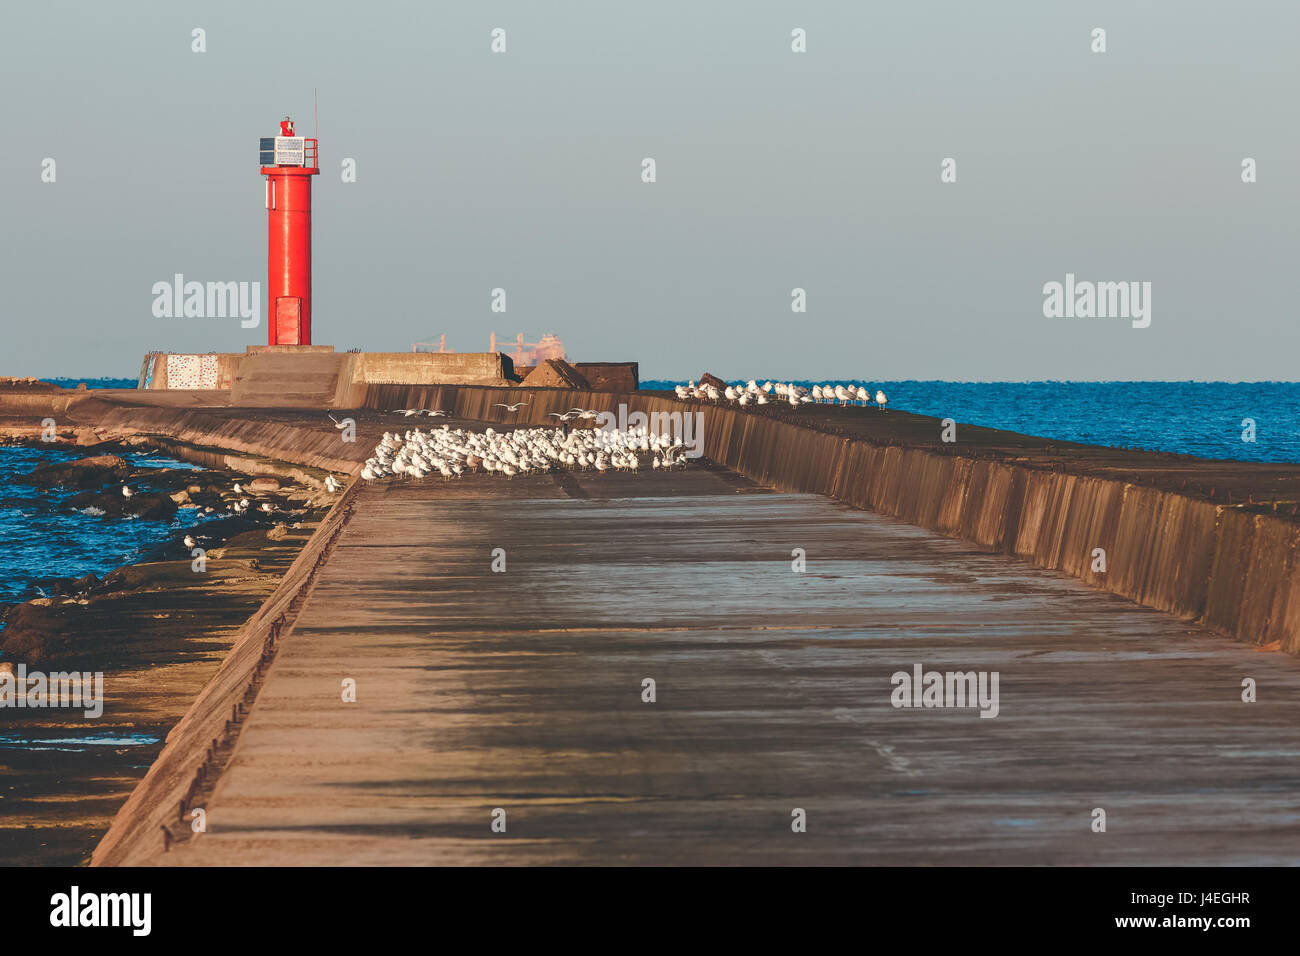 Red lighthouse on breakwater jetty at Baltic sea Stock Photo